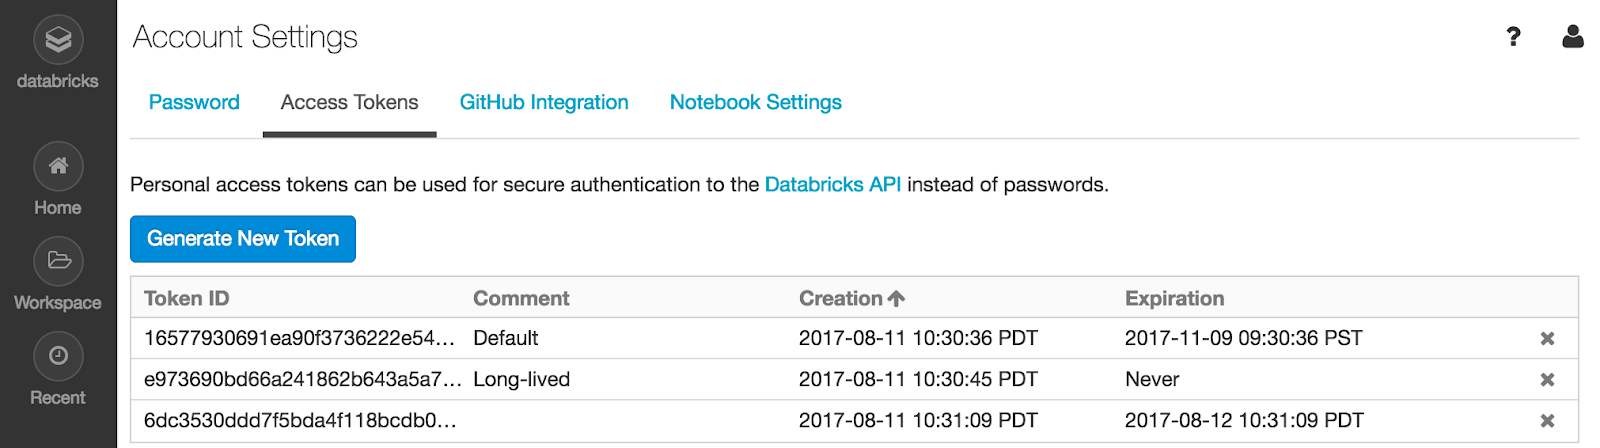 Step 2 of the Data Ingestion Network setup requires you to log in to your Databricks account and create an authentication token.